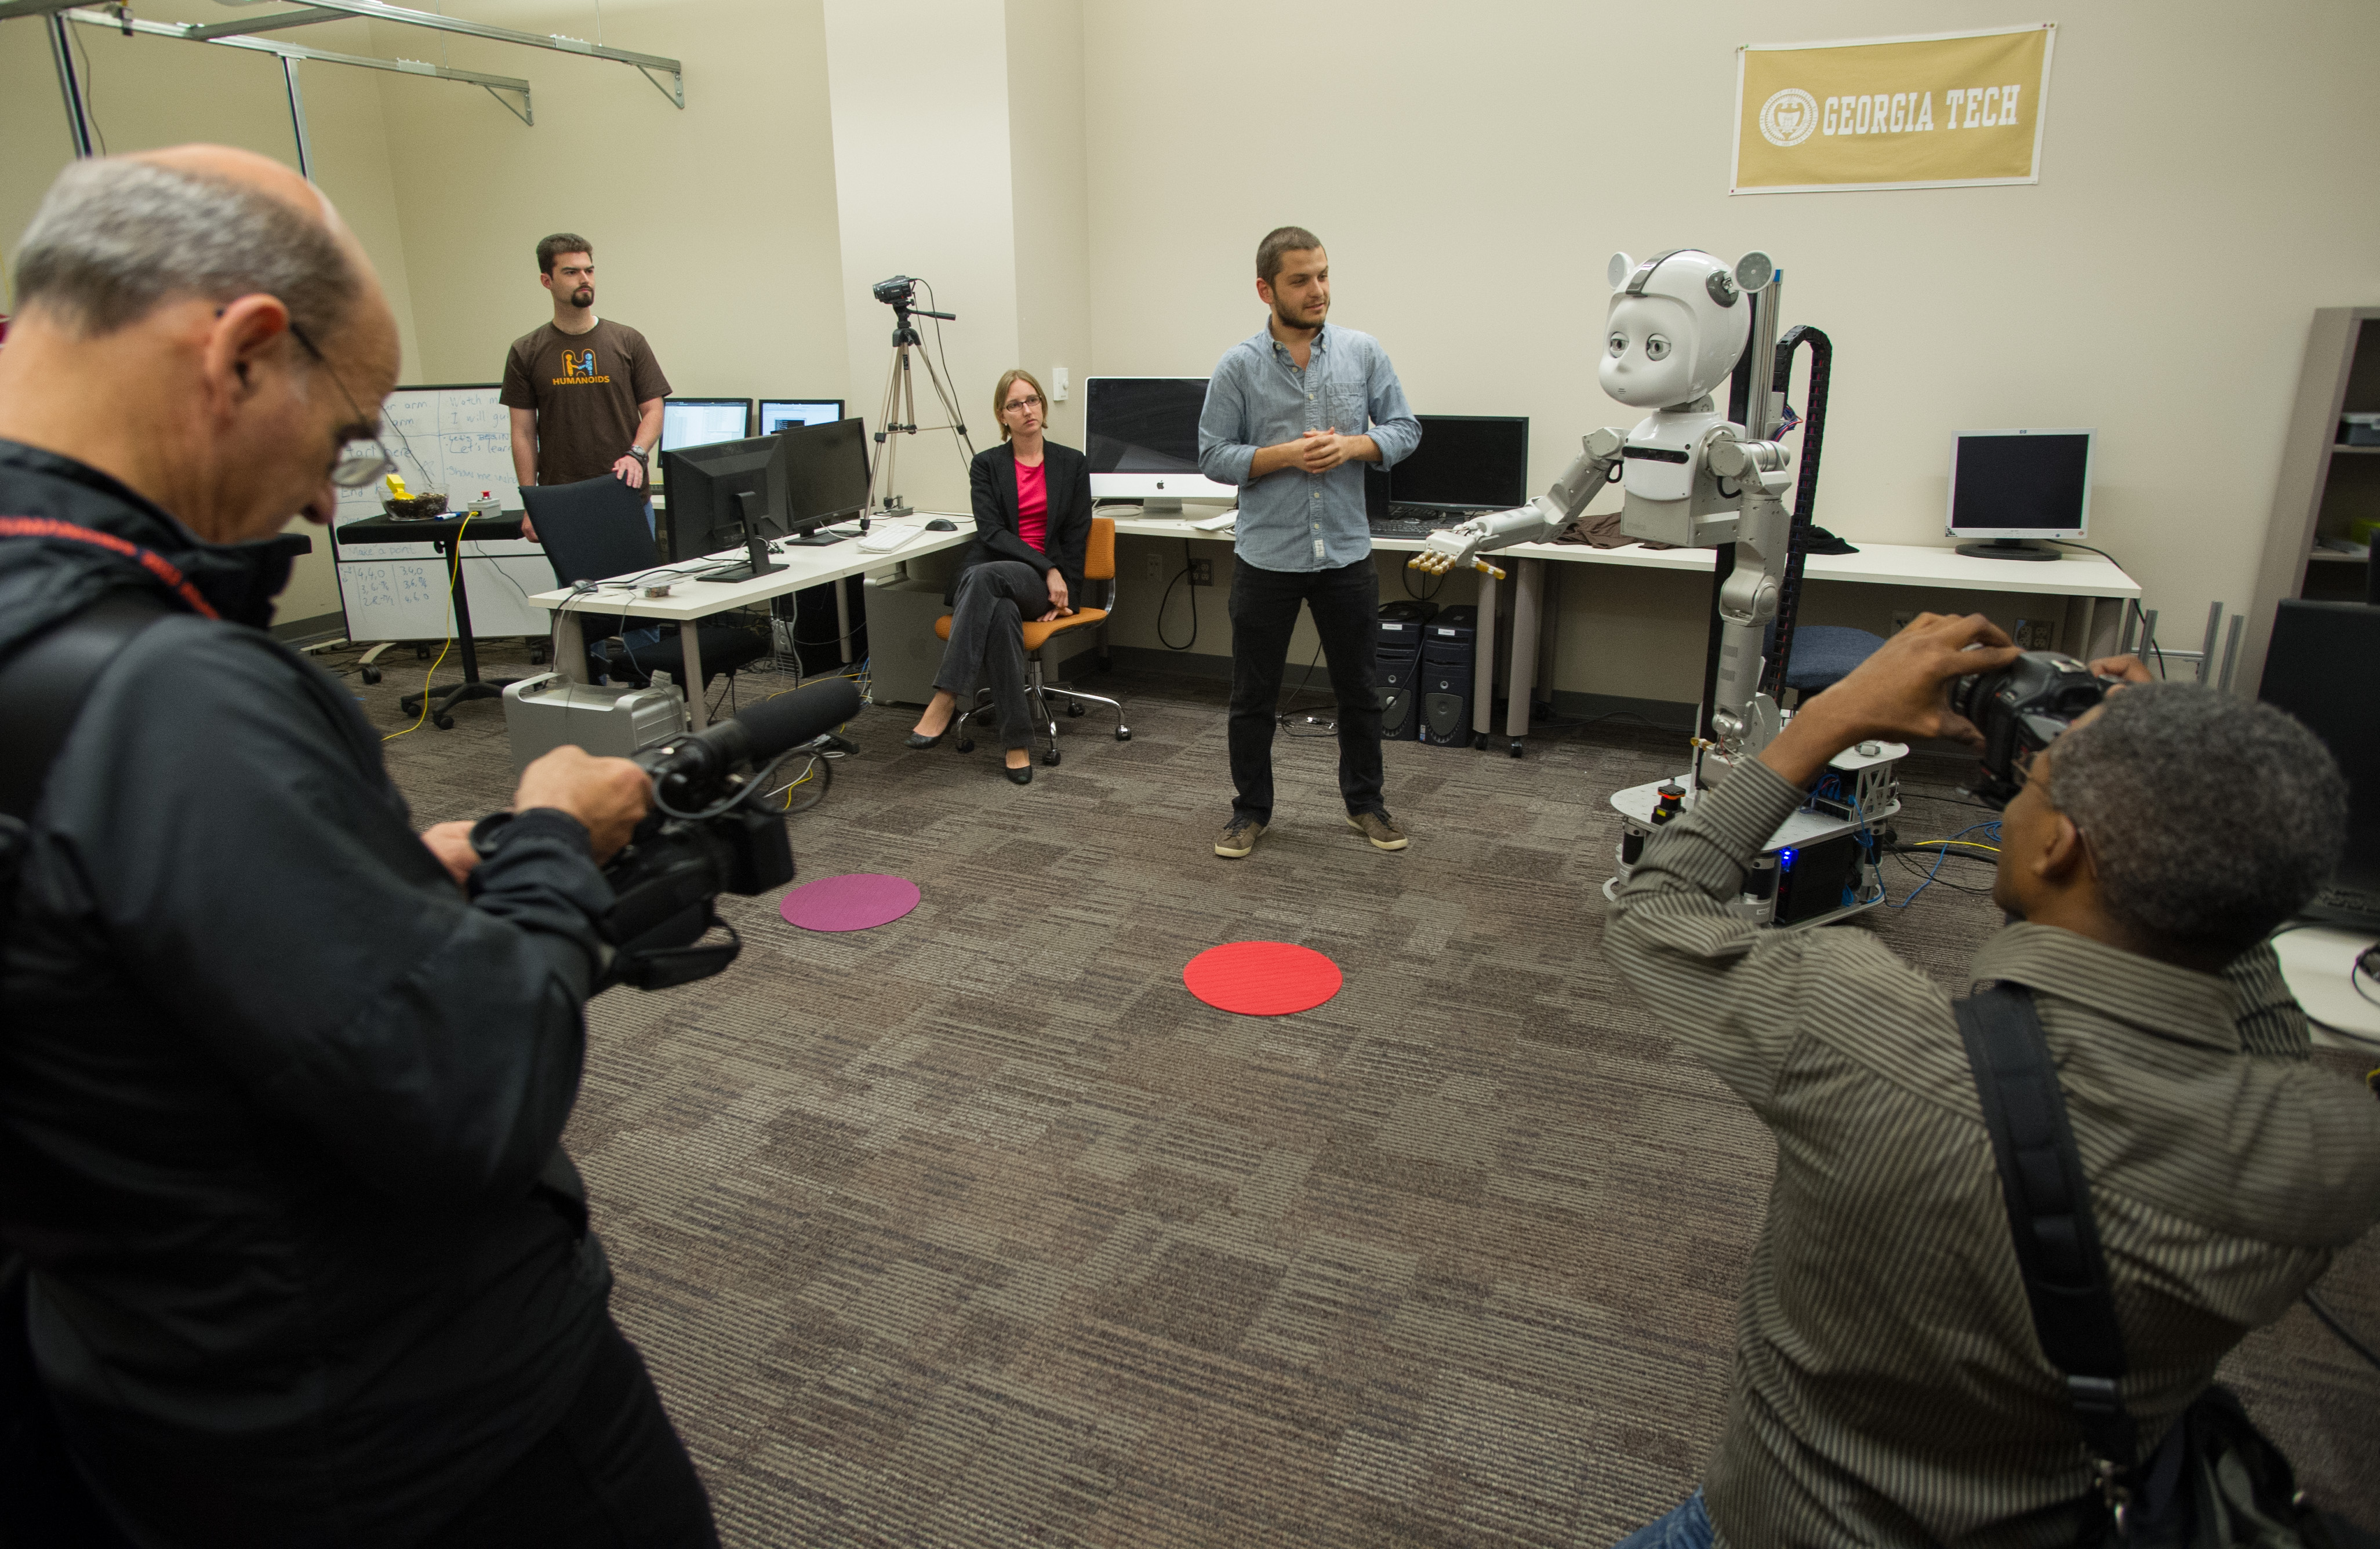 Roboticists from around the world visit Simon while touring Georgia Tech labs during the Humanoids 2013 conference.